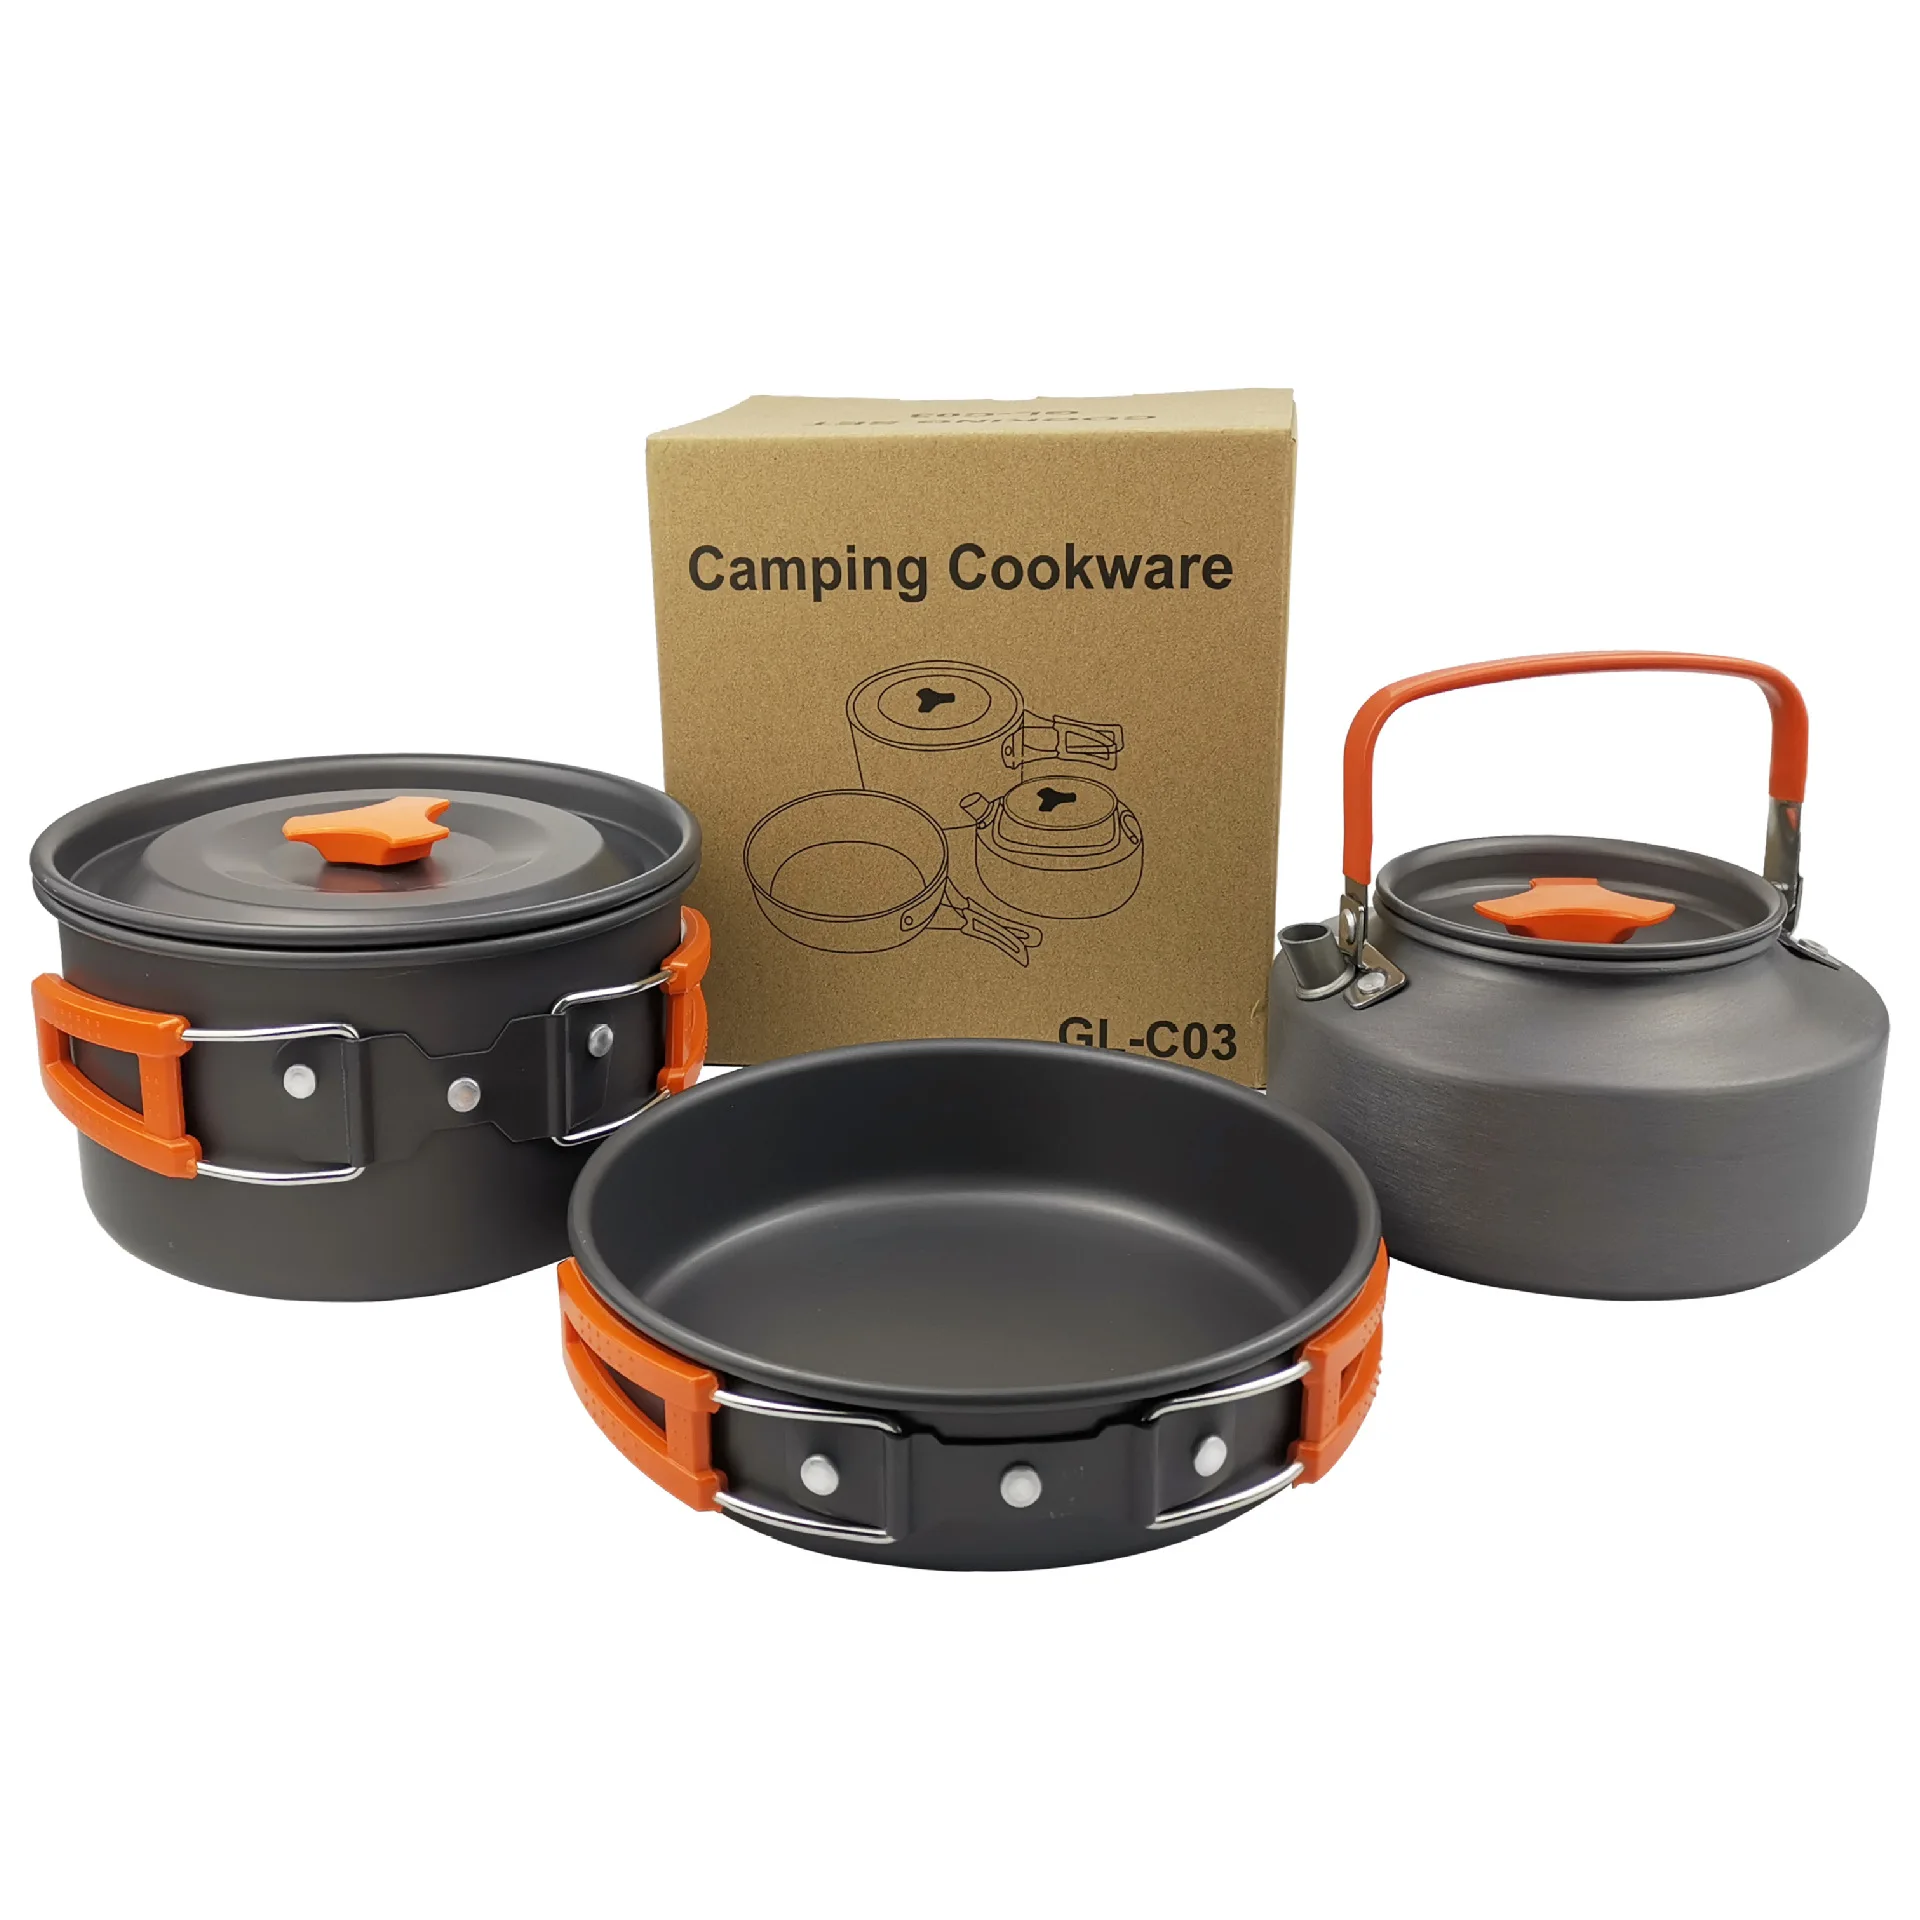 Outdoor Portable Camping Cooker Teapot Set Alumina 3-piece Kettle Set for 2-3 People Camp Cooking Supplies